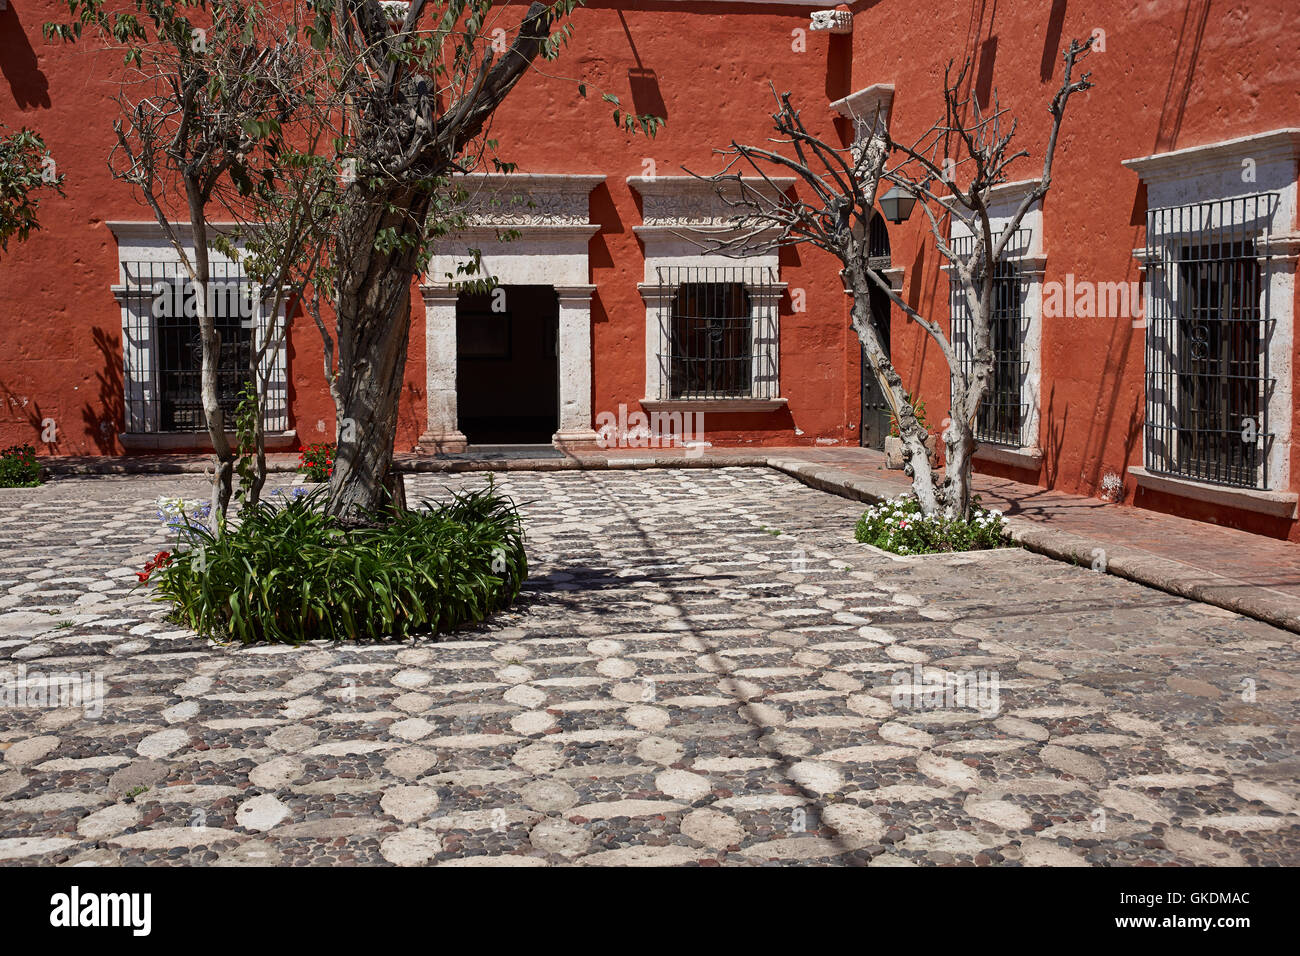 Secluded courtyard of the 18th century baroque style Spanish colonial house Casa del Moral in Arequipa, Peru Stock Photo